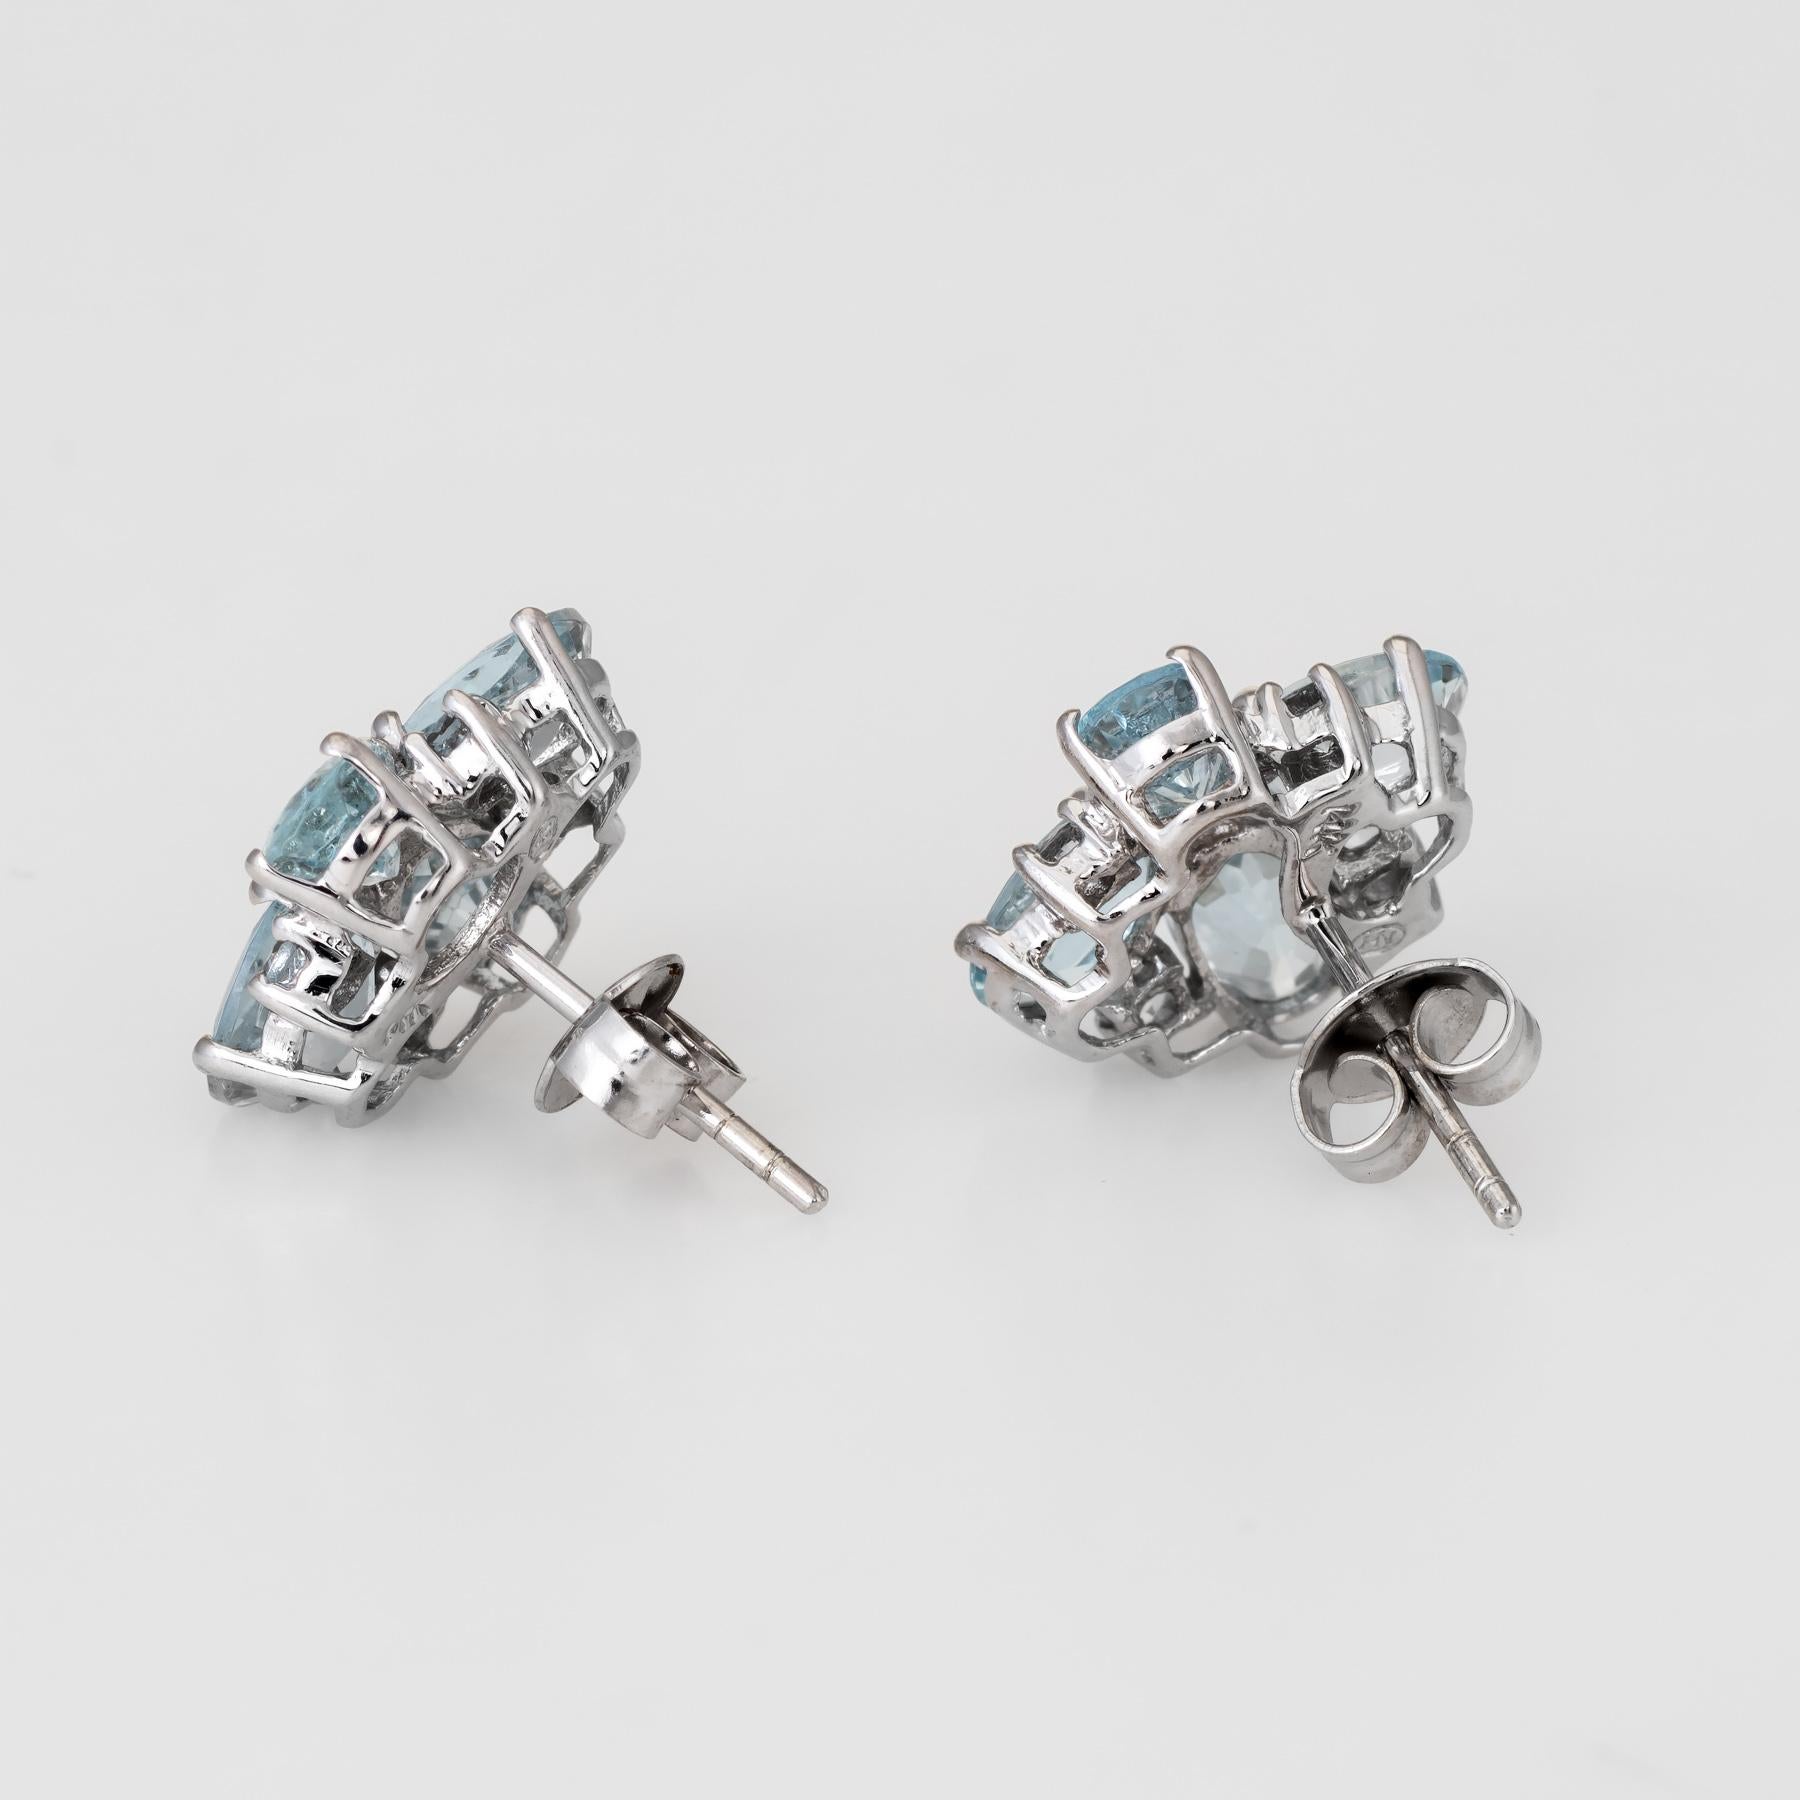 Elegant pair of aquamarine square stud earrings, crafted in 14k white gold. 

Faceted oval and round cut aquamarines total an estimated 2 carats. The aquamarines are in excellent condition and free of cracks or chips.  

The earrings feature post